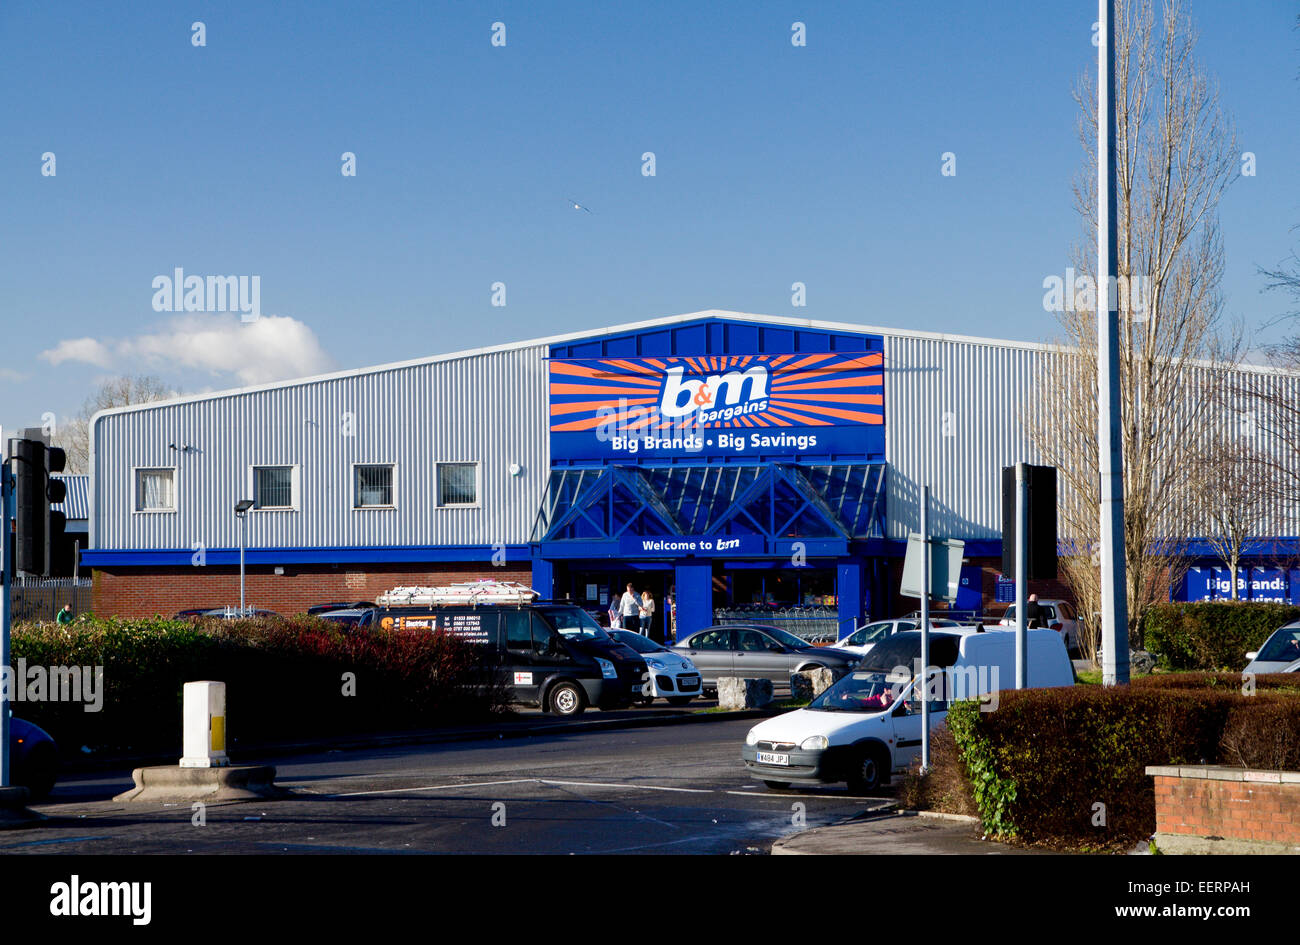 B&M Bargains discount superstore, Newport Road, Cardiff, Wales, UK. Stock Photo